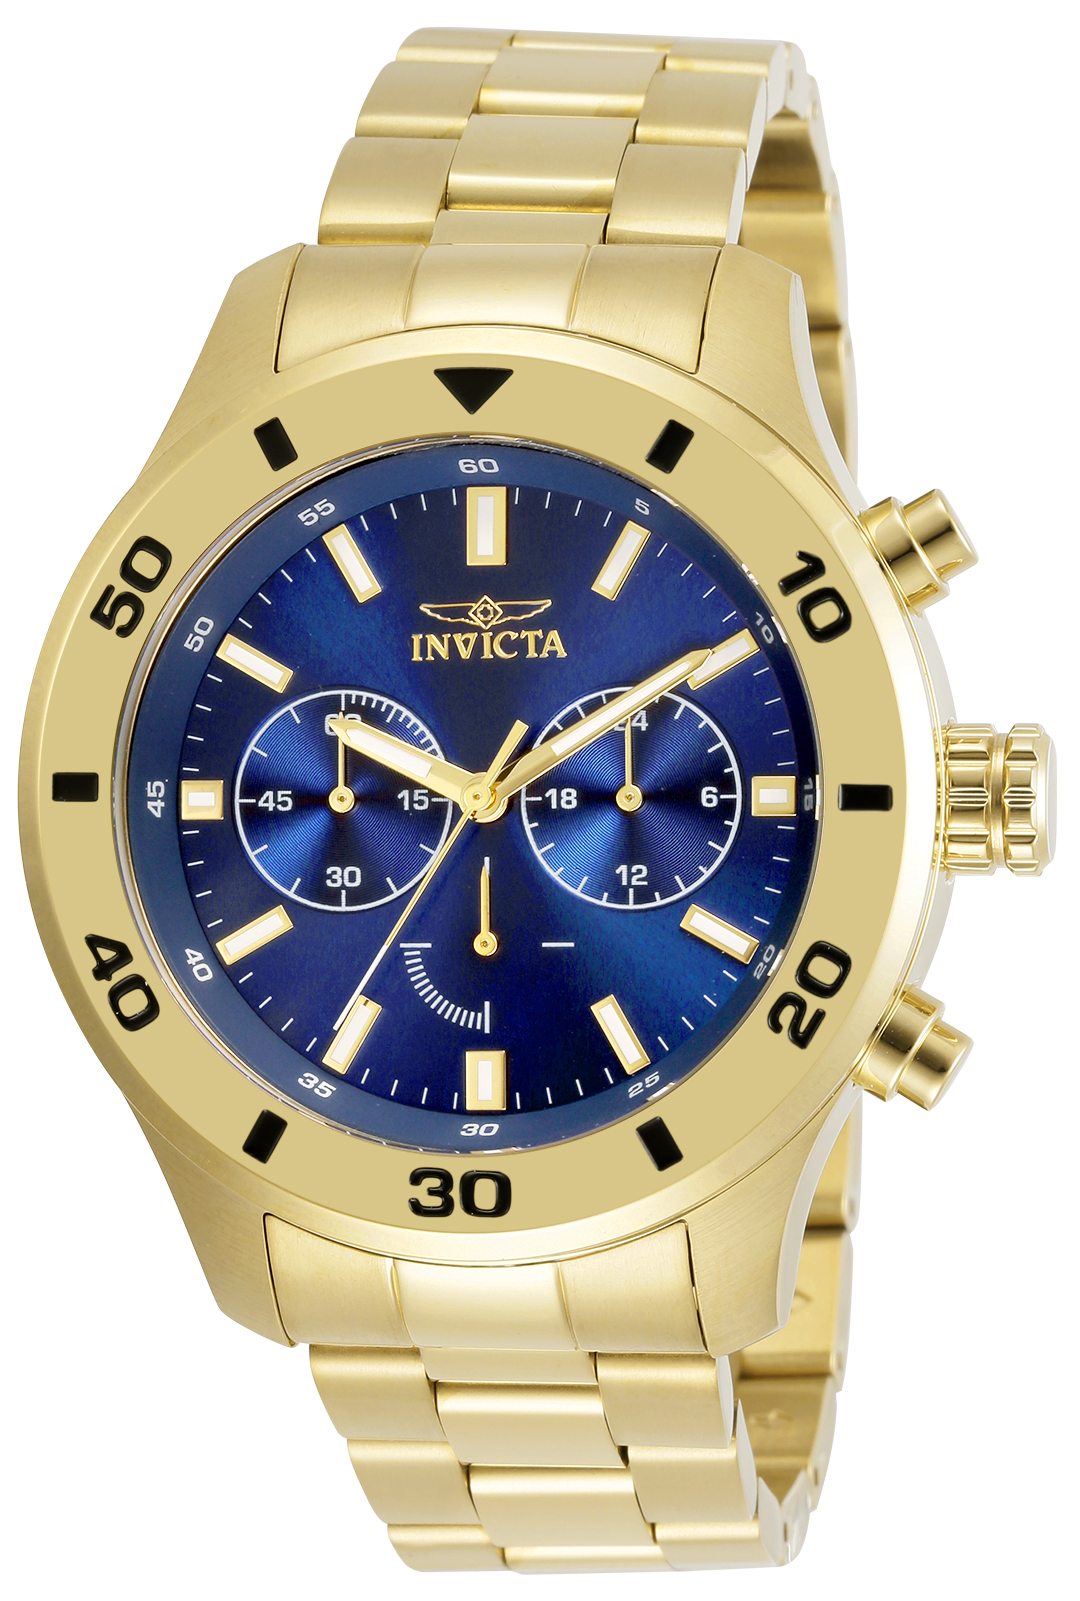 Invicta Specialty Men%27s Watch - 48mm, Gold (28892)